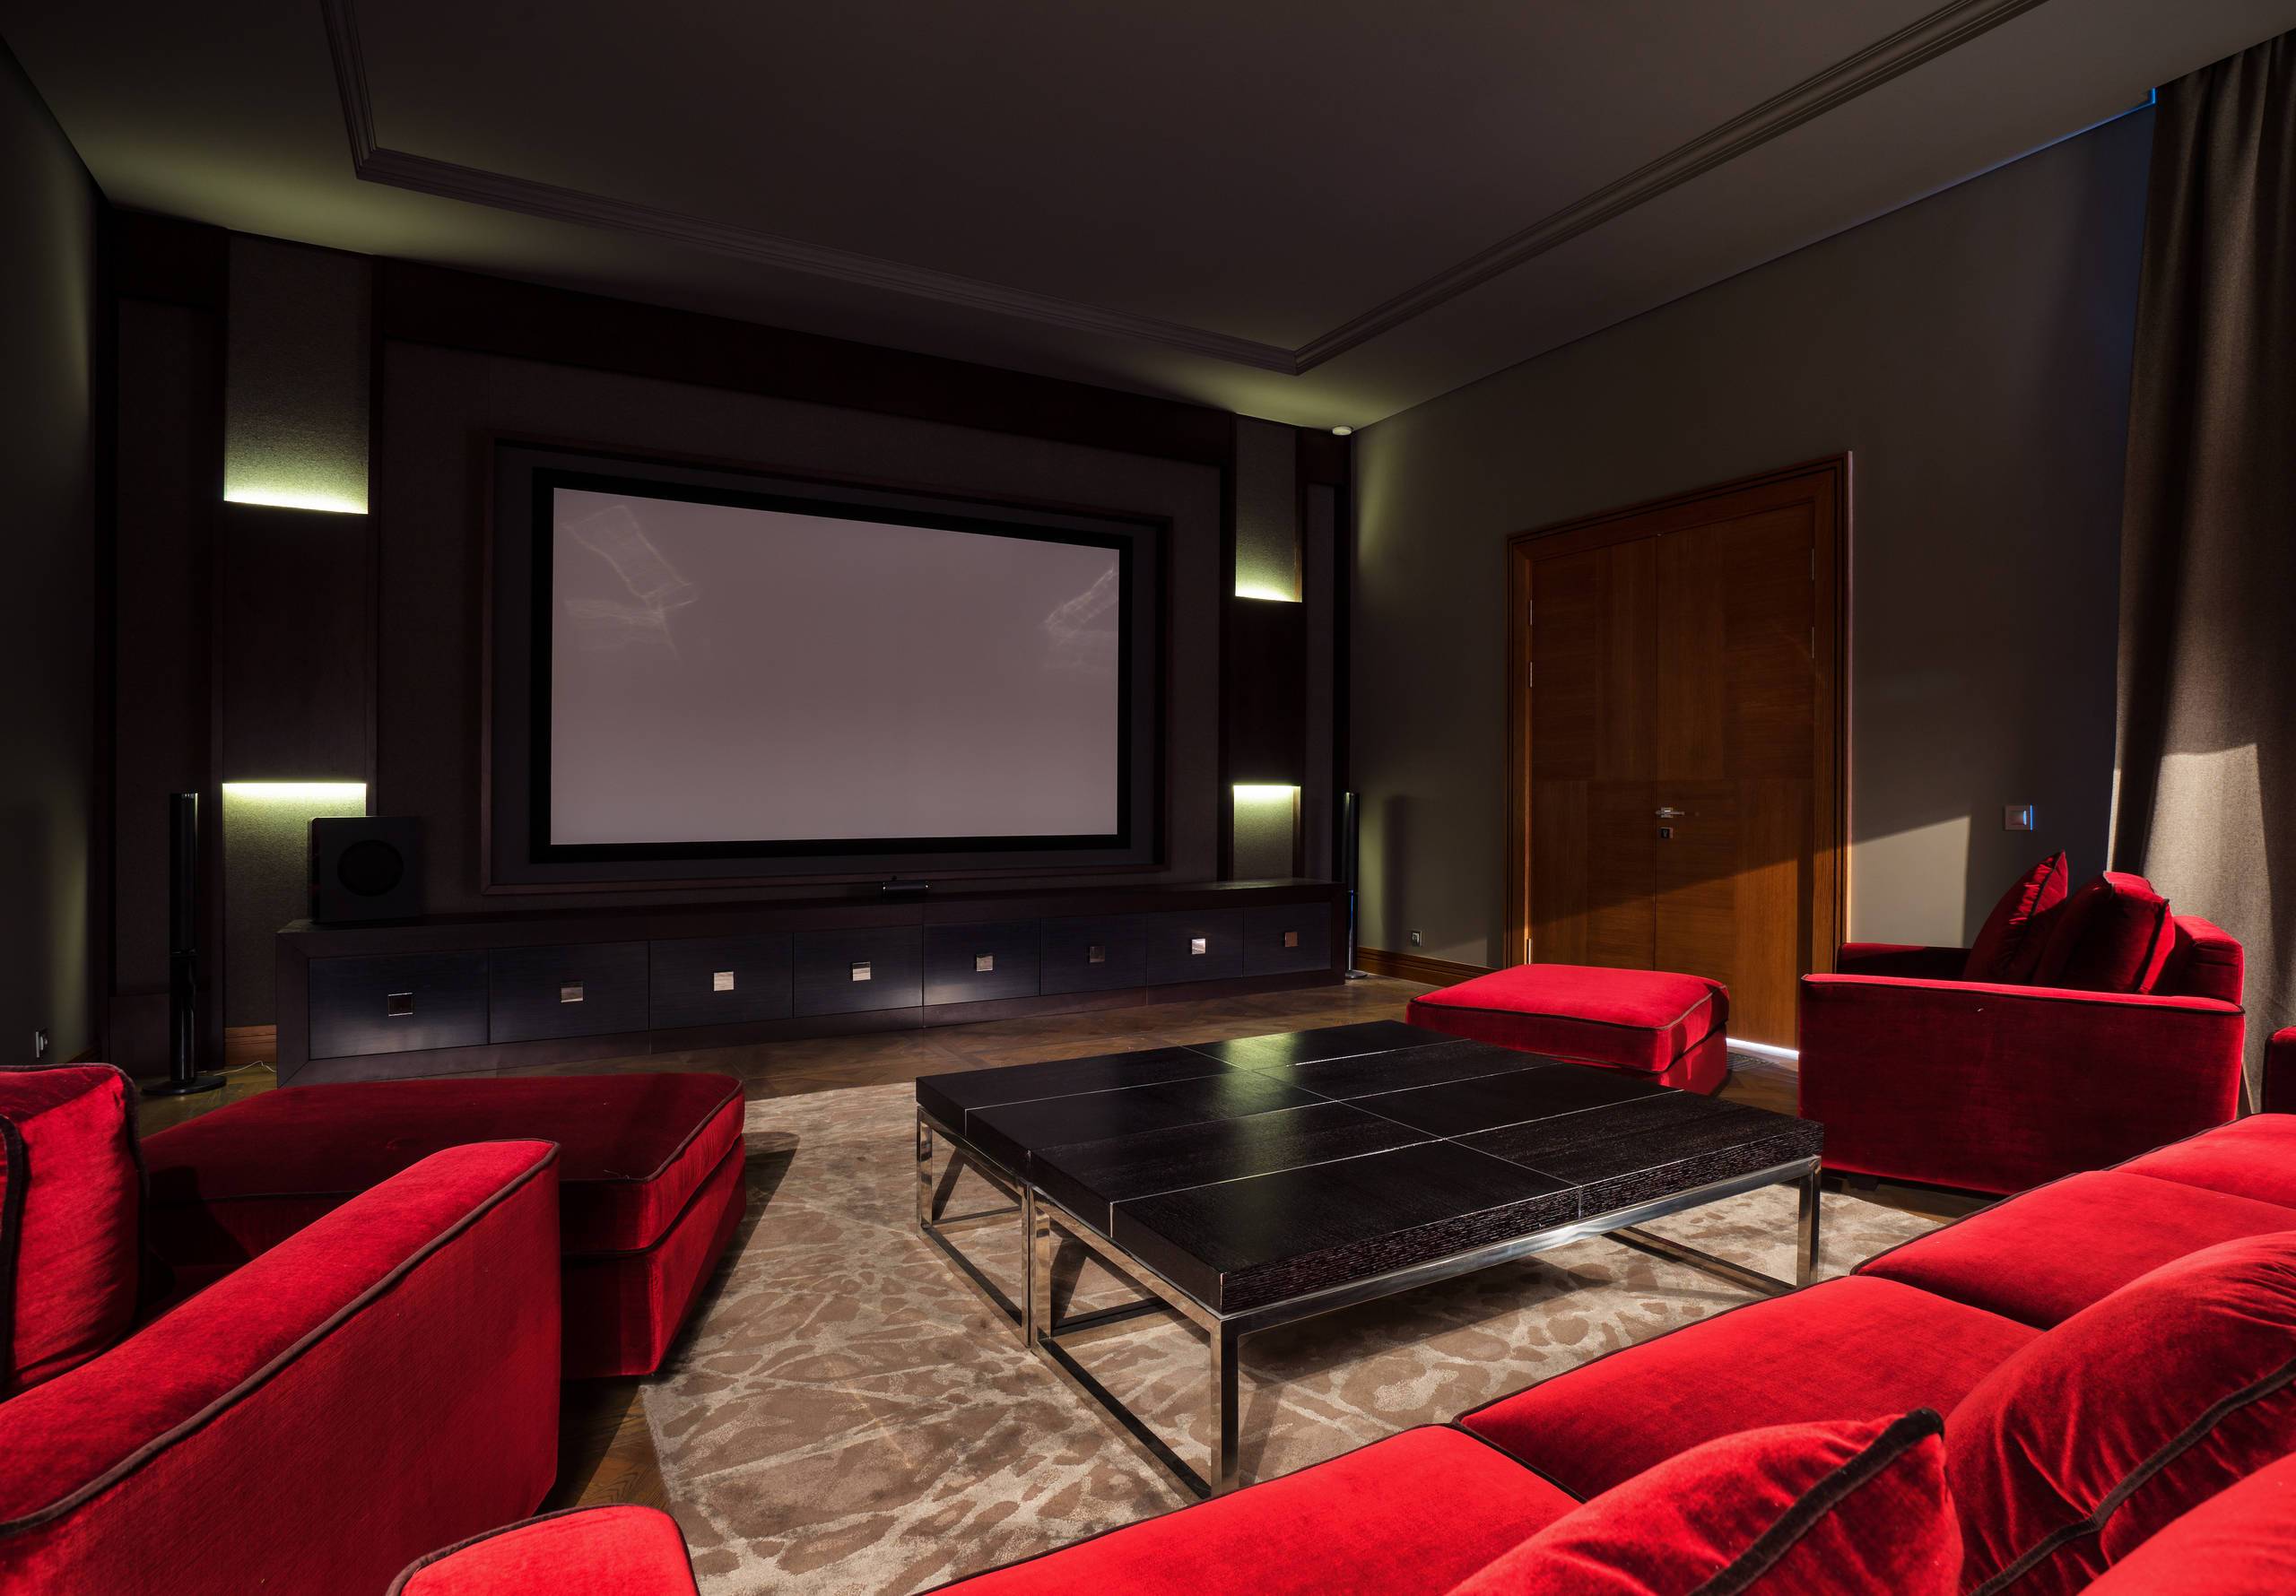 Home theater for family entertainment (from Houzz)